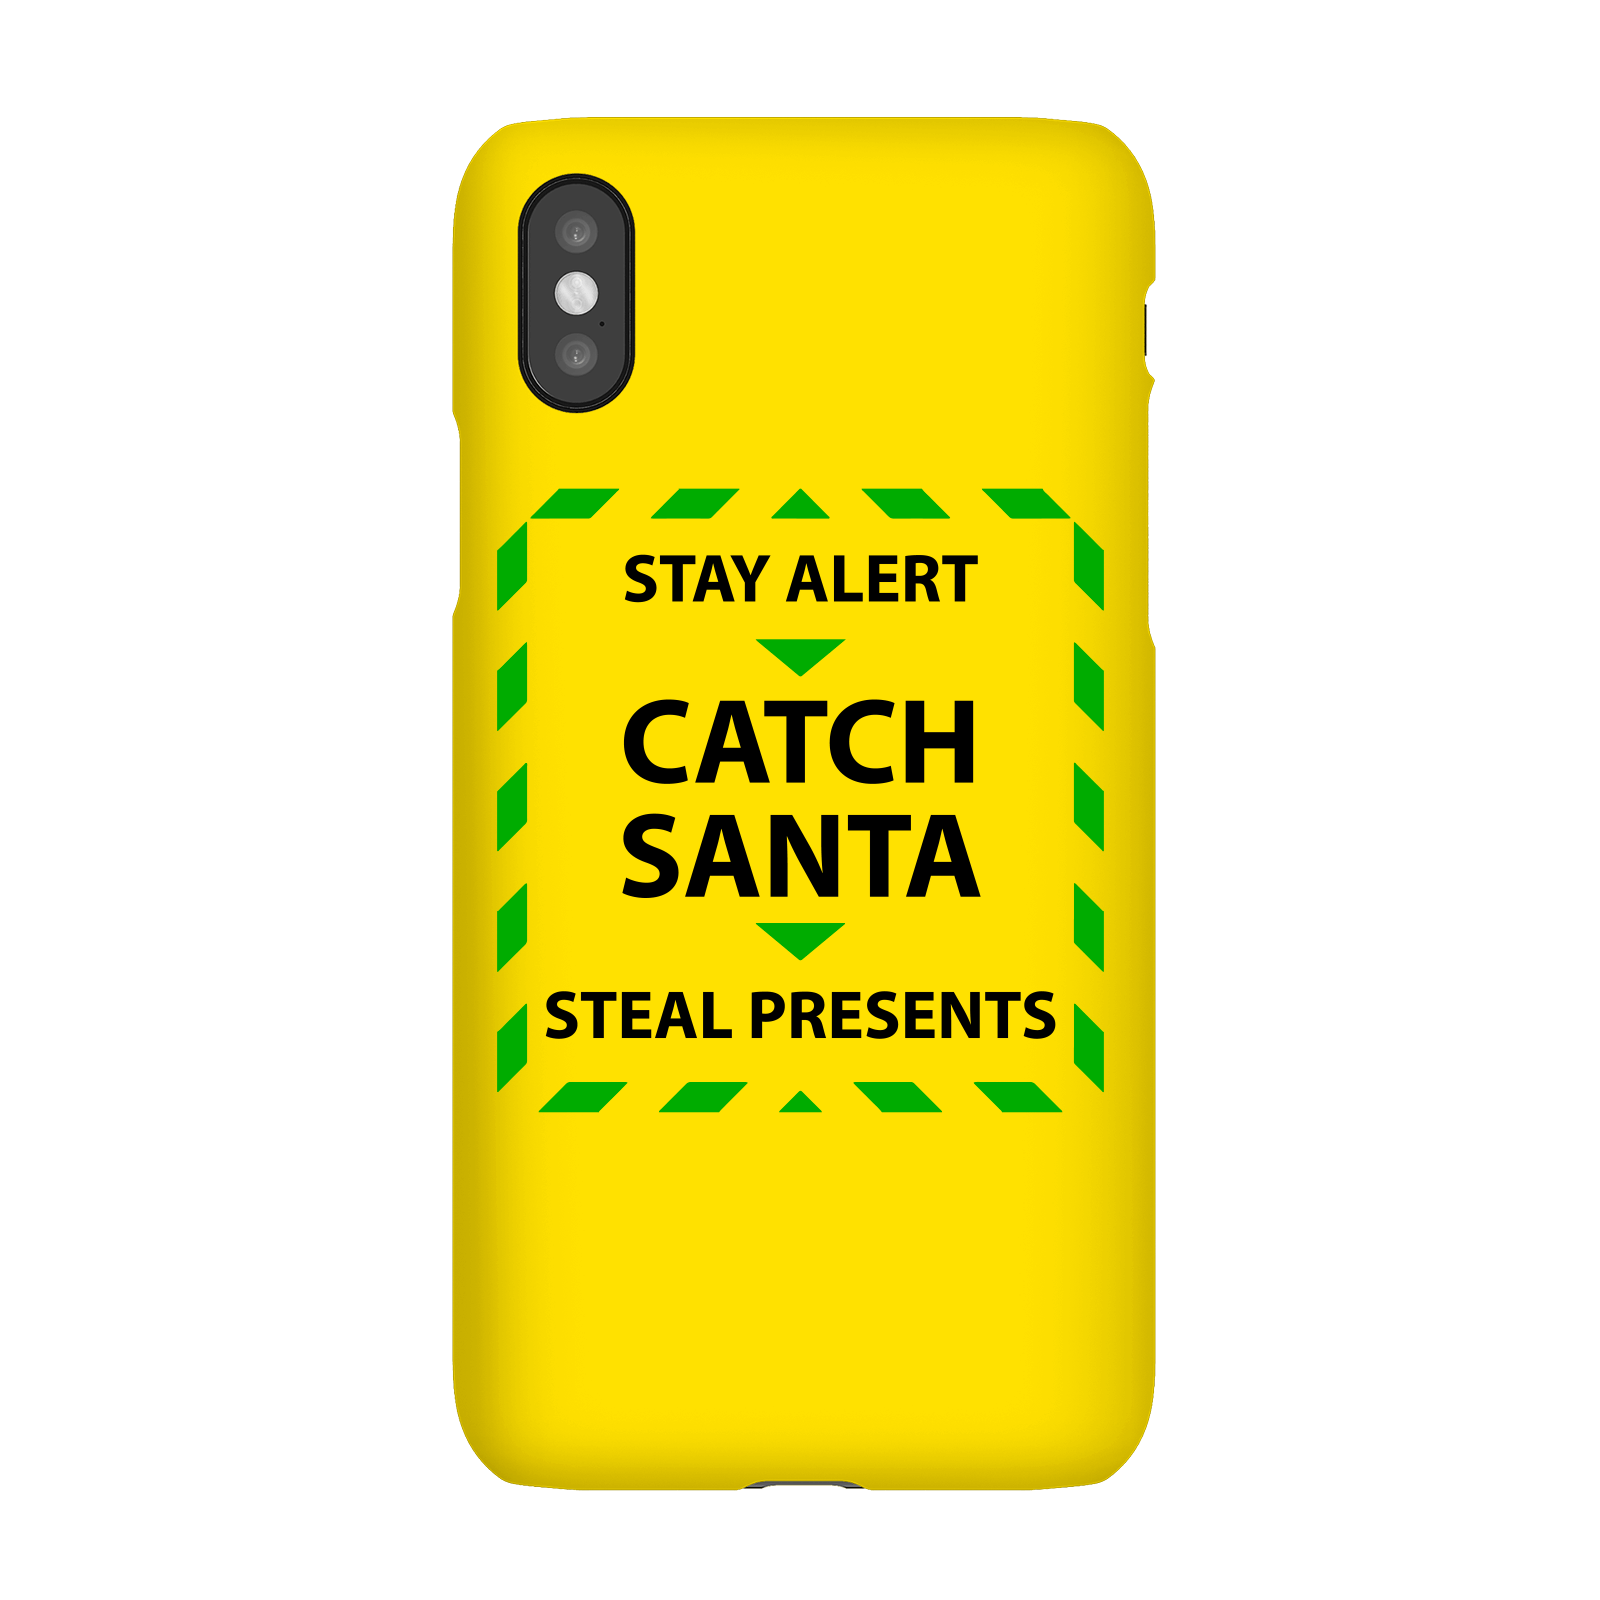 Stay Alert & Catch Santa Phone Case for iPhone and Android - iPhone 5/5s - Snap Case - Matte